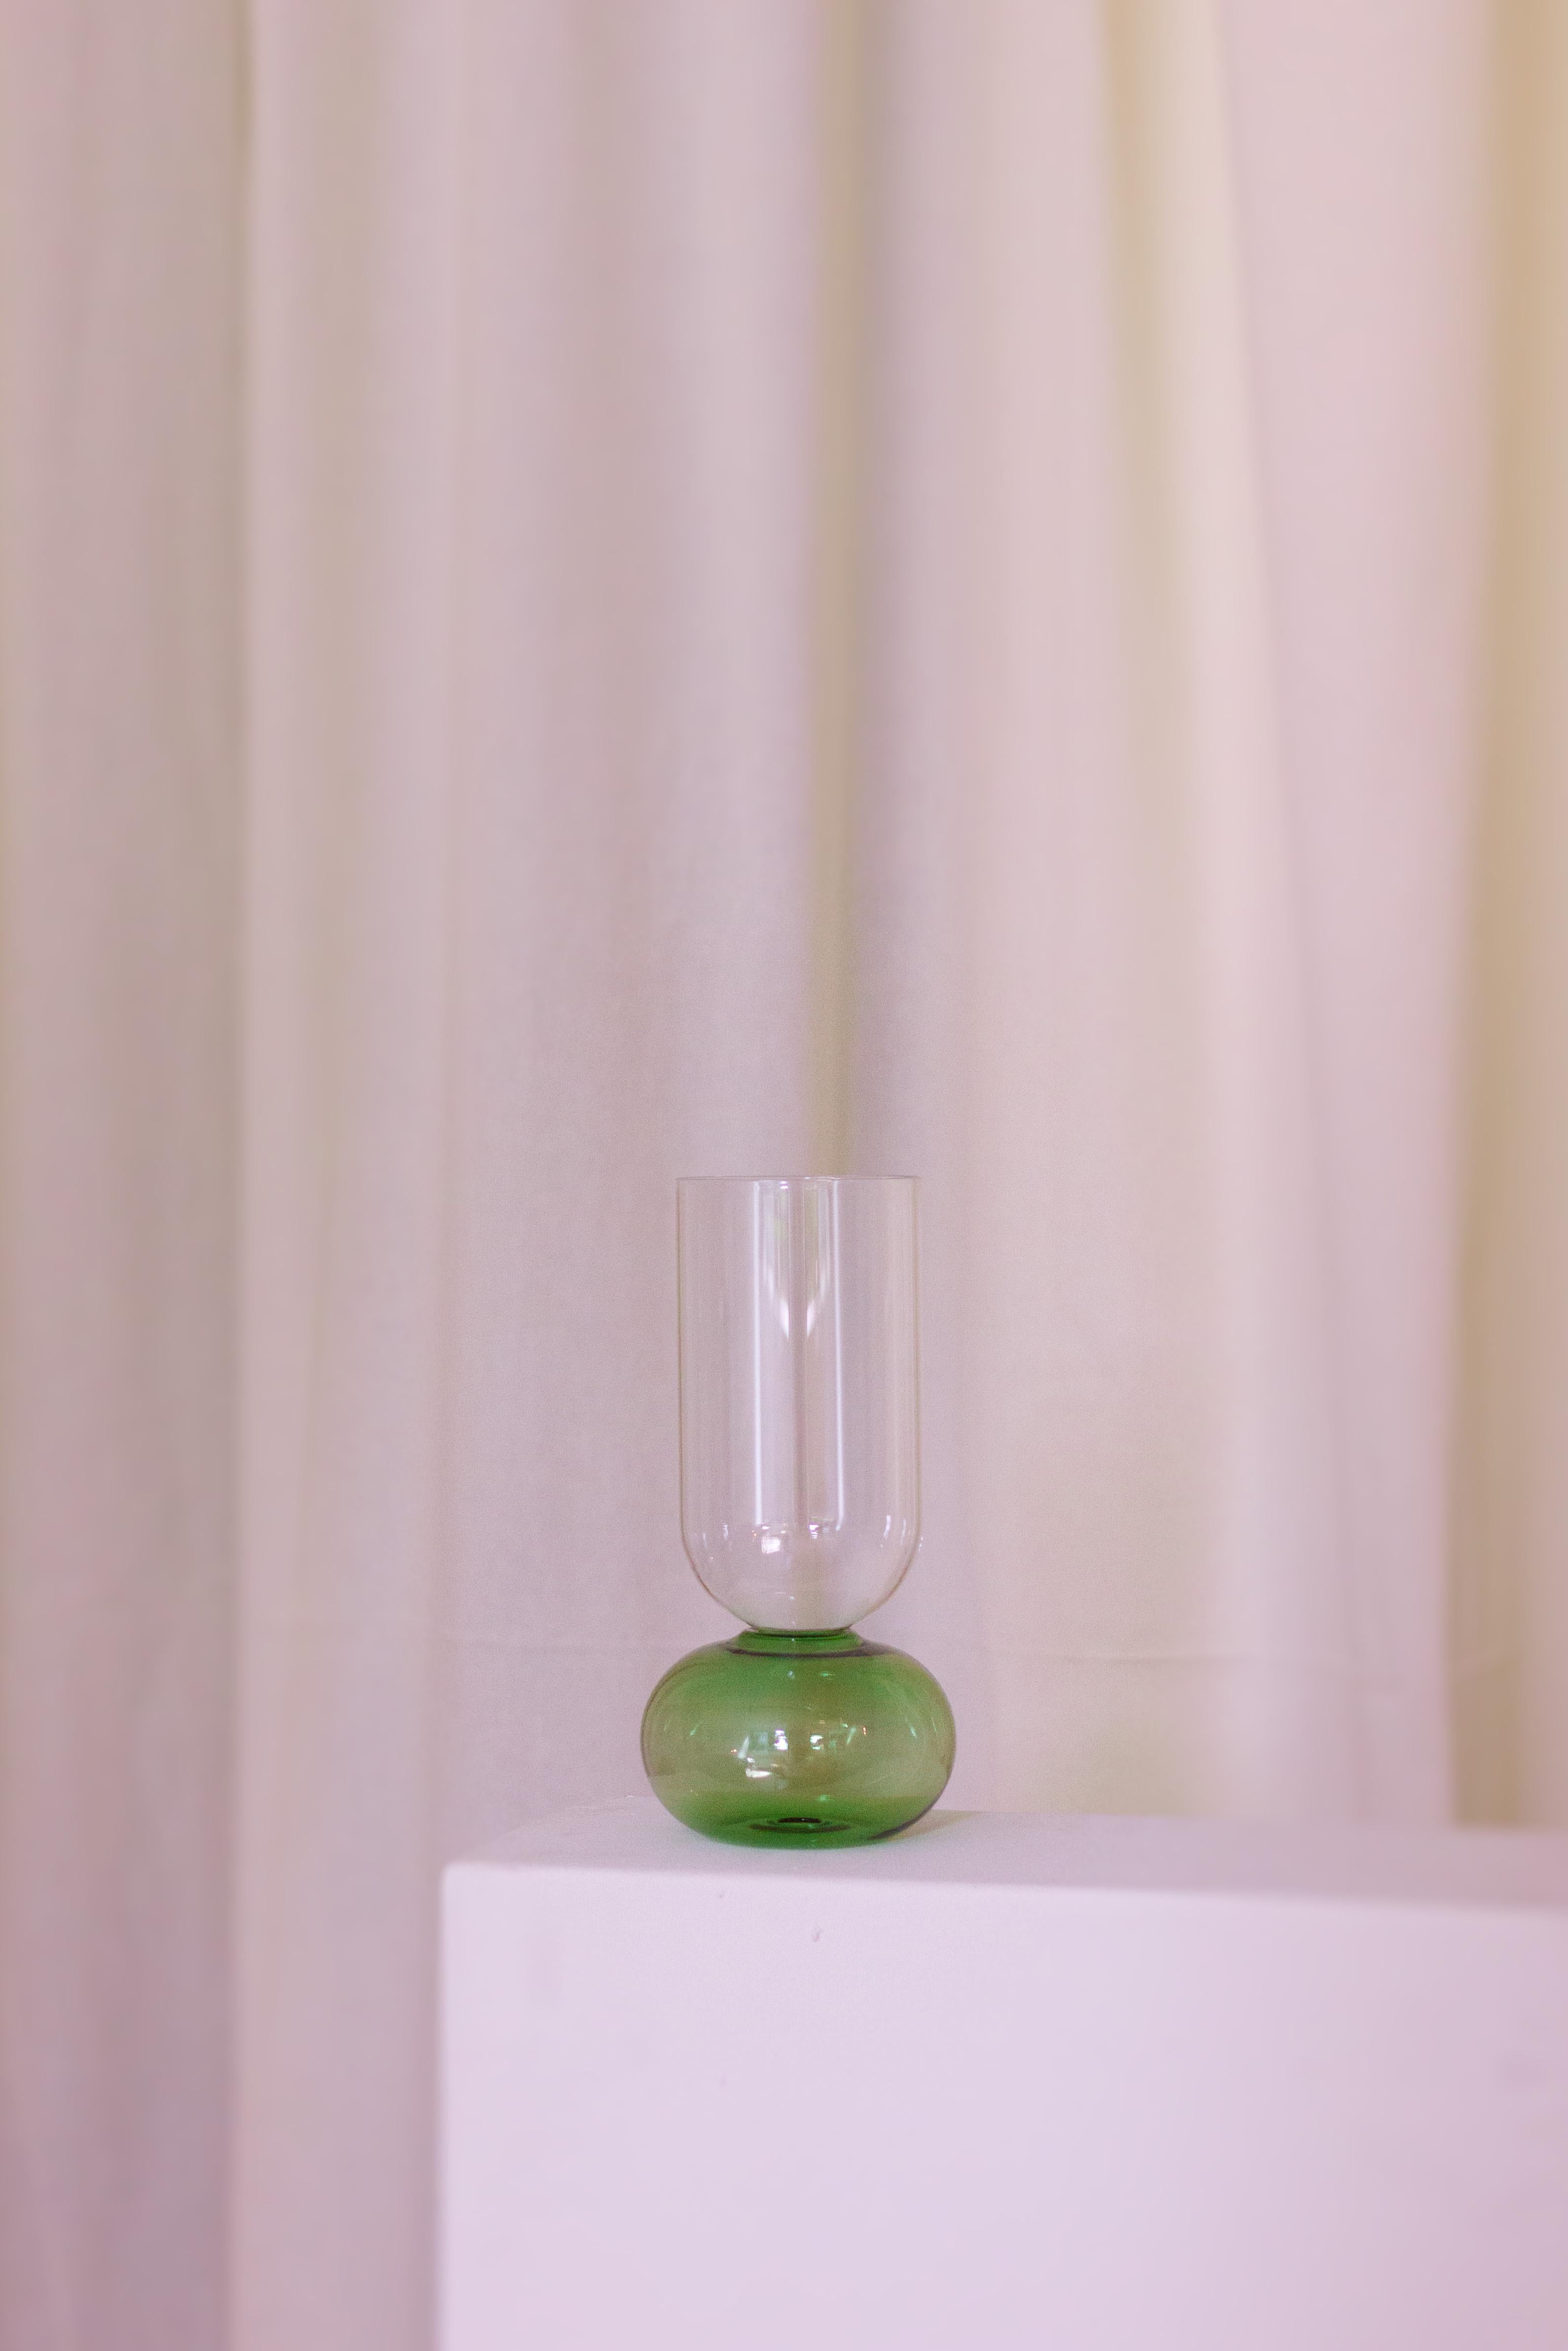 This charming vase handcrafted of fine crystal is a showcase of pure volumes. Its elegant silhouette is composed of a spherical, blue base sustaining the cylindrical, clear body. Crafted following traditional, 19th-century techniques, this stunning